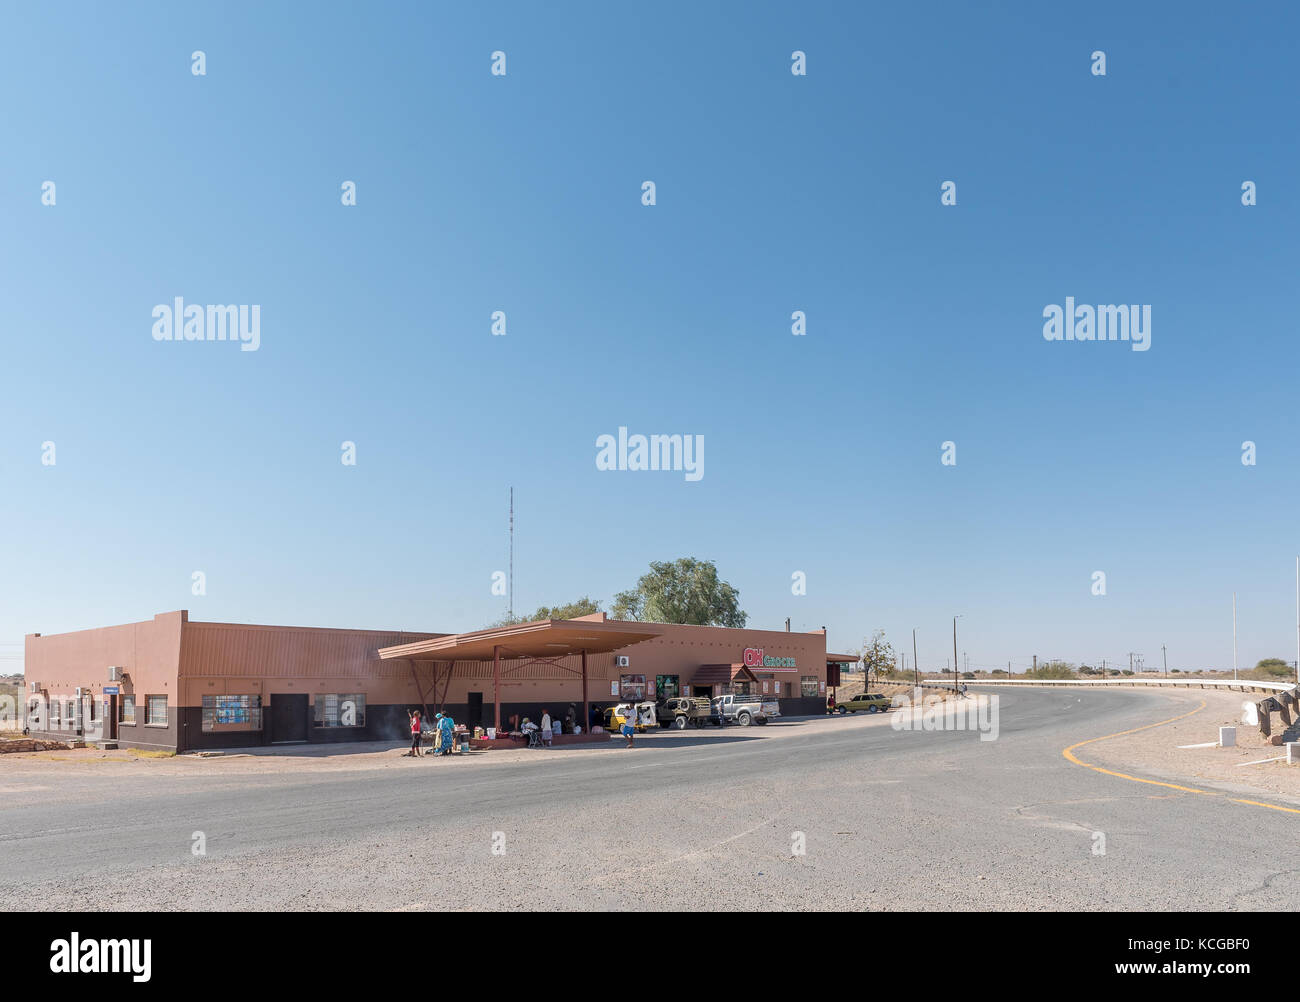 STAMPRIET, NAMIBIA - JULY 5, 2017: A shopping centre and street vendors in Stampriet, a small town of the Hardap Region in Namibia Stock Photo